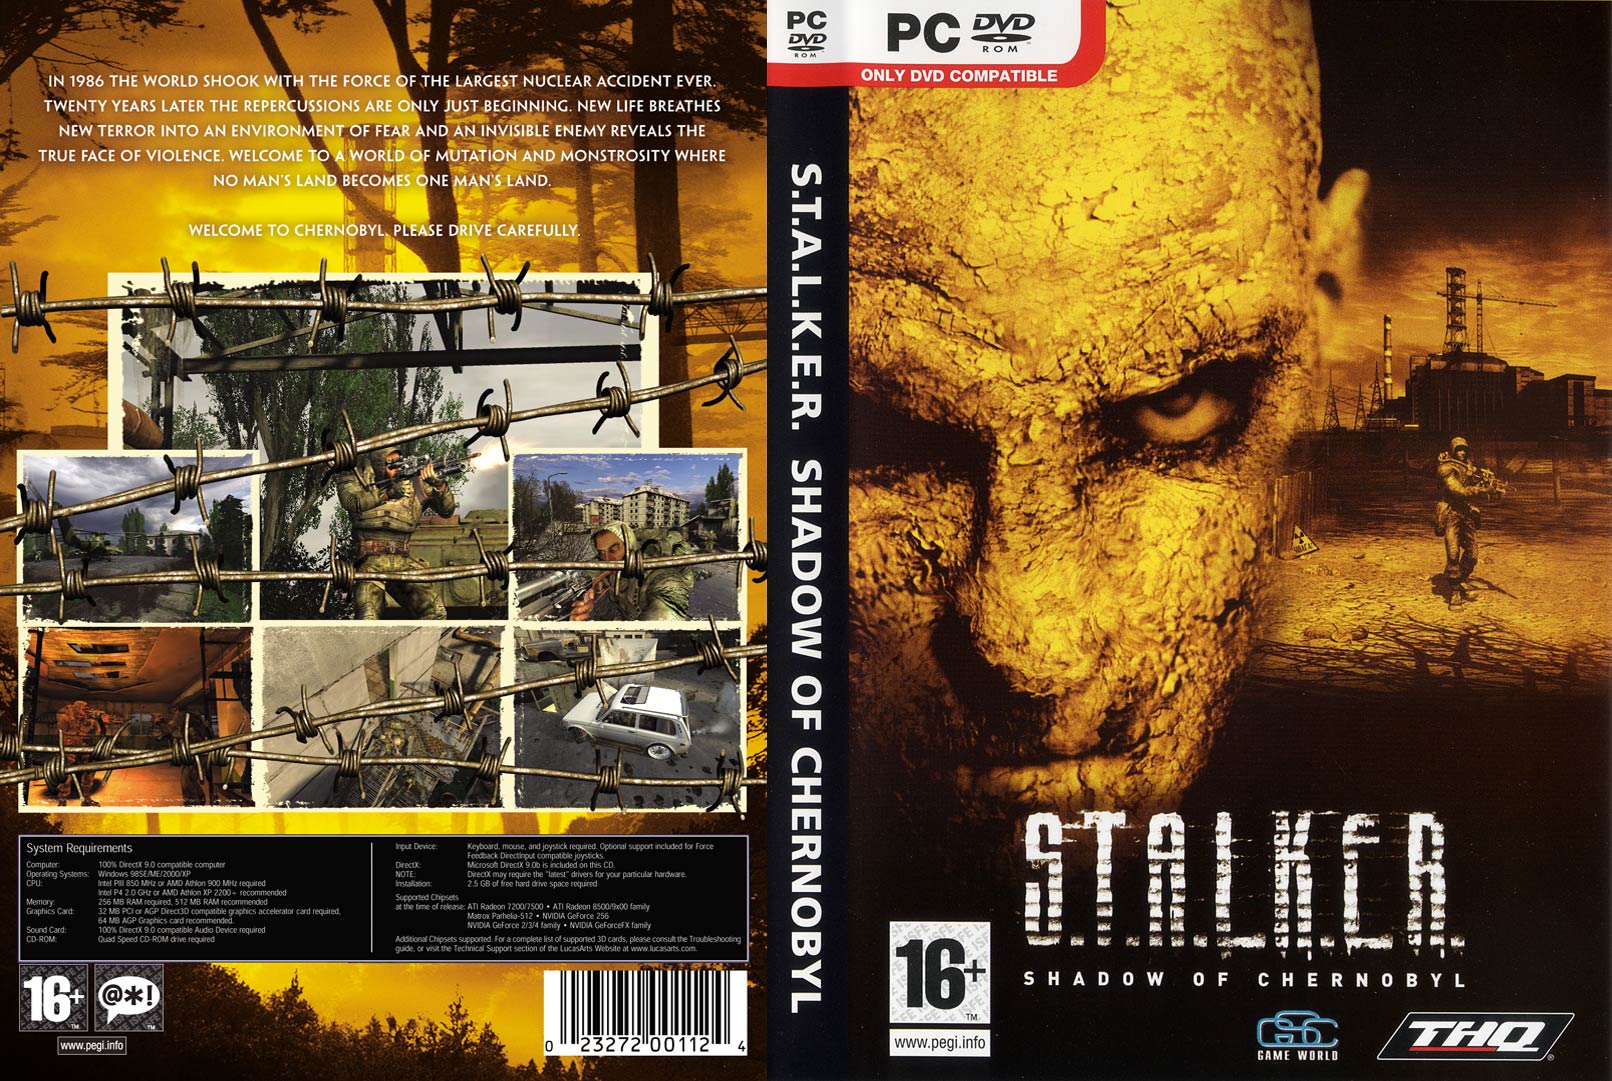 S.T.A.L.K.E.R.: Shadow of Chernobyl - DVD obal 2